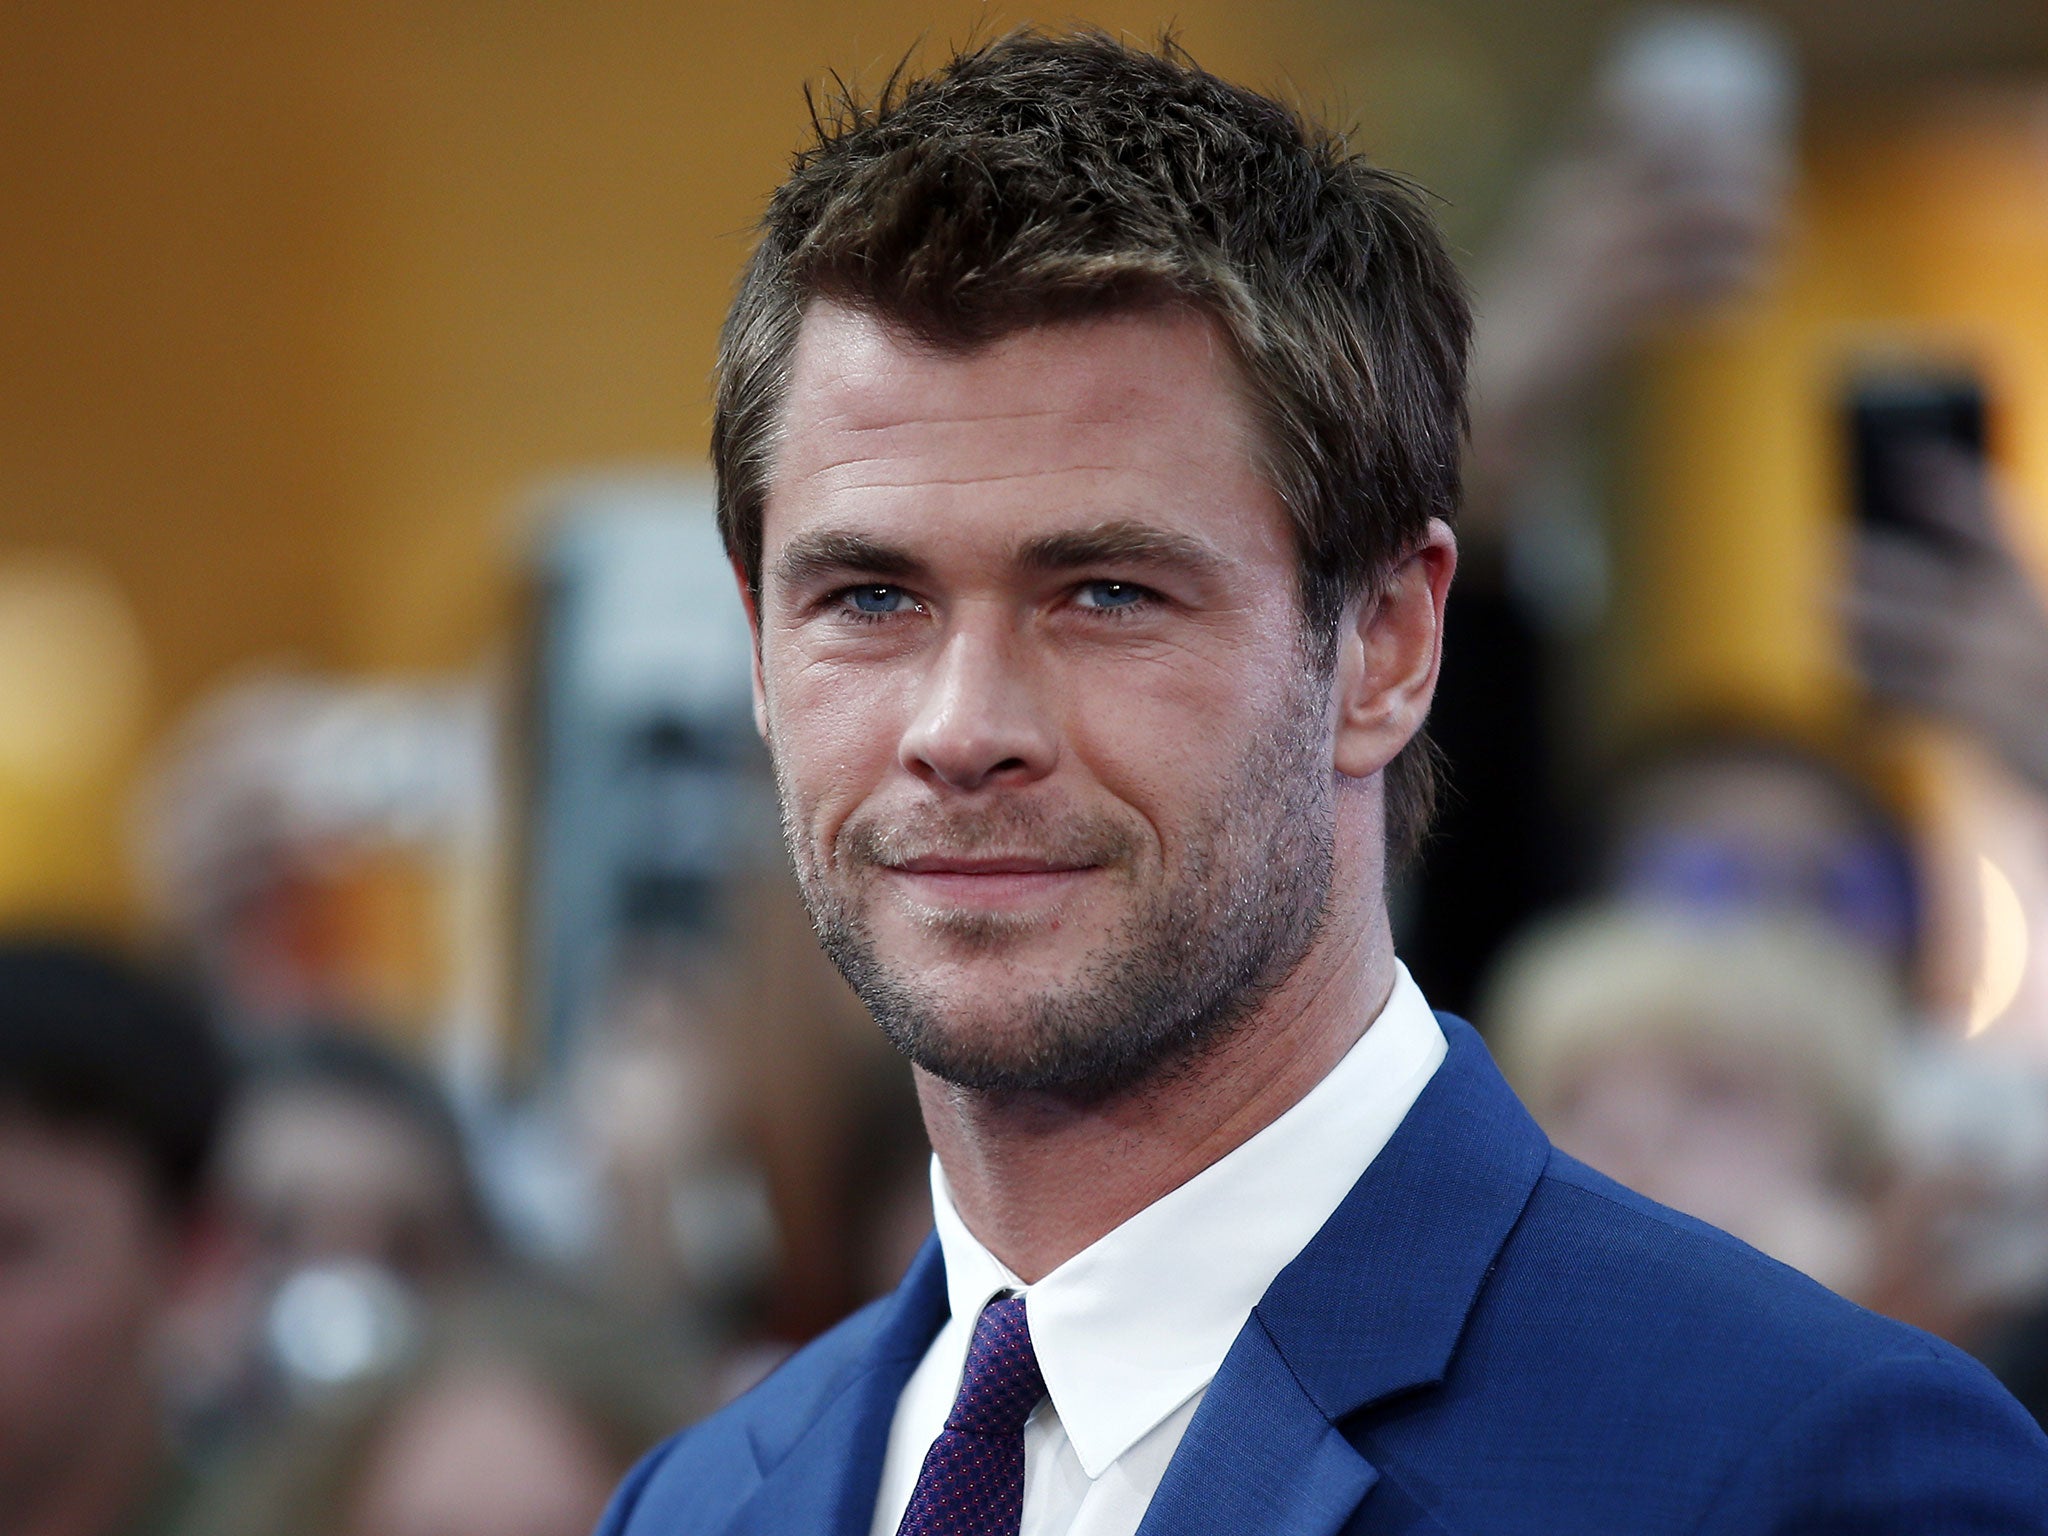 Chris Hemsworth is known for major action roles but will soon be seen behind a desk in the all-female Ghostbusters